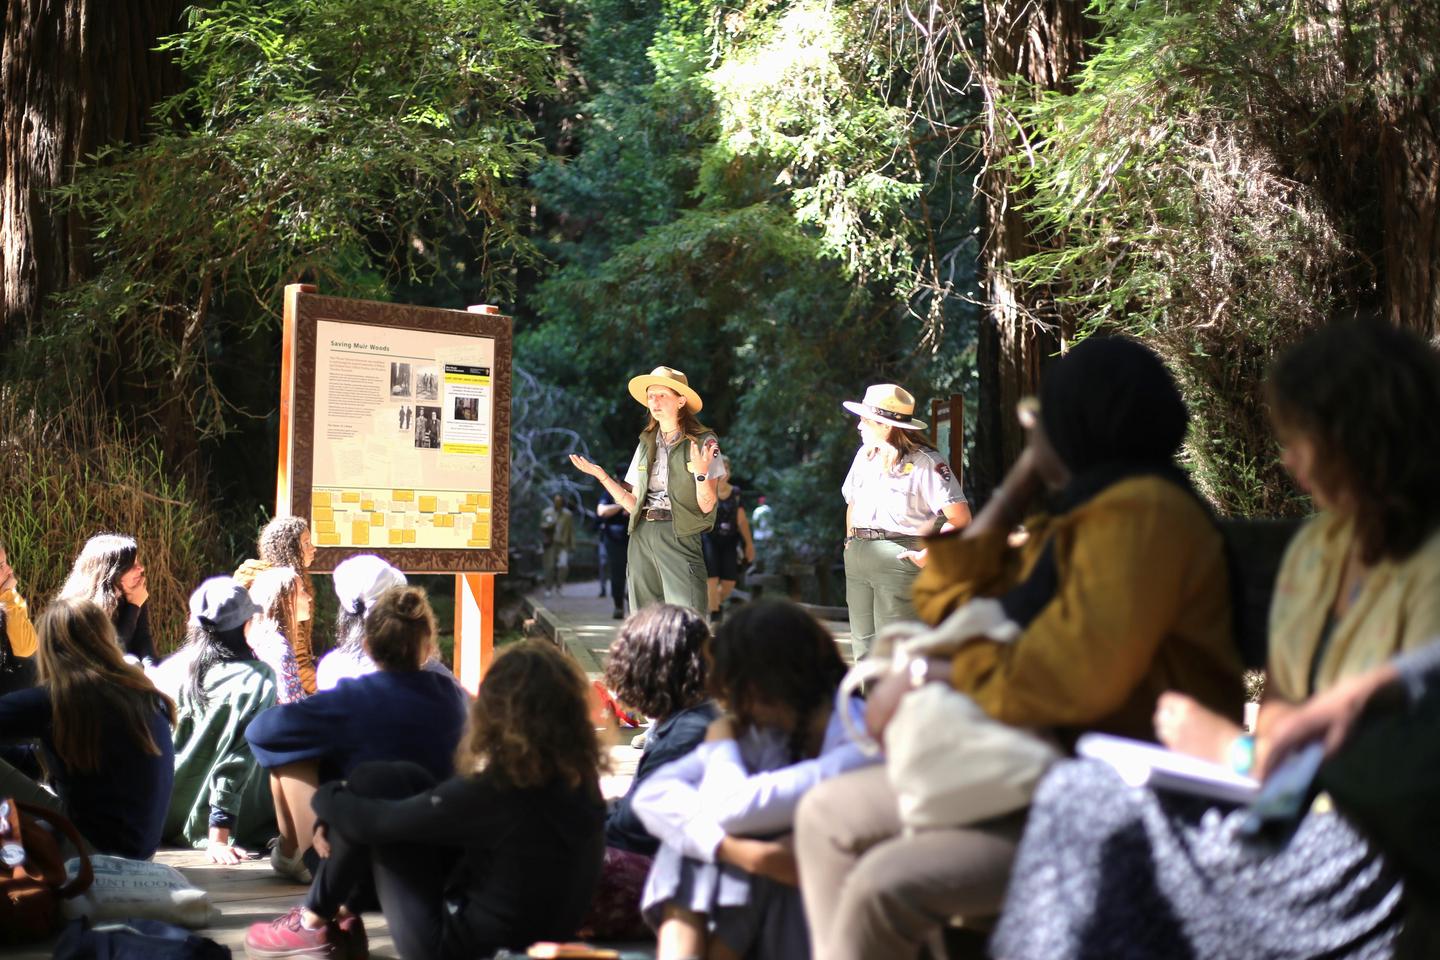 Rangers speaking with school groupMore than just a forest, Muir Woods has rich cultural history.